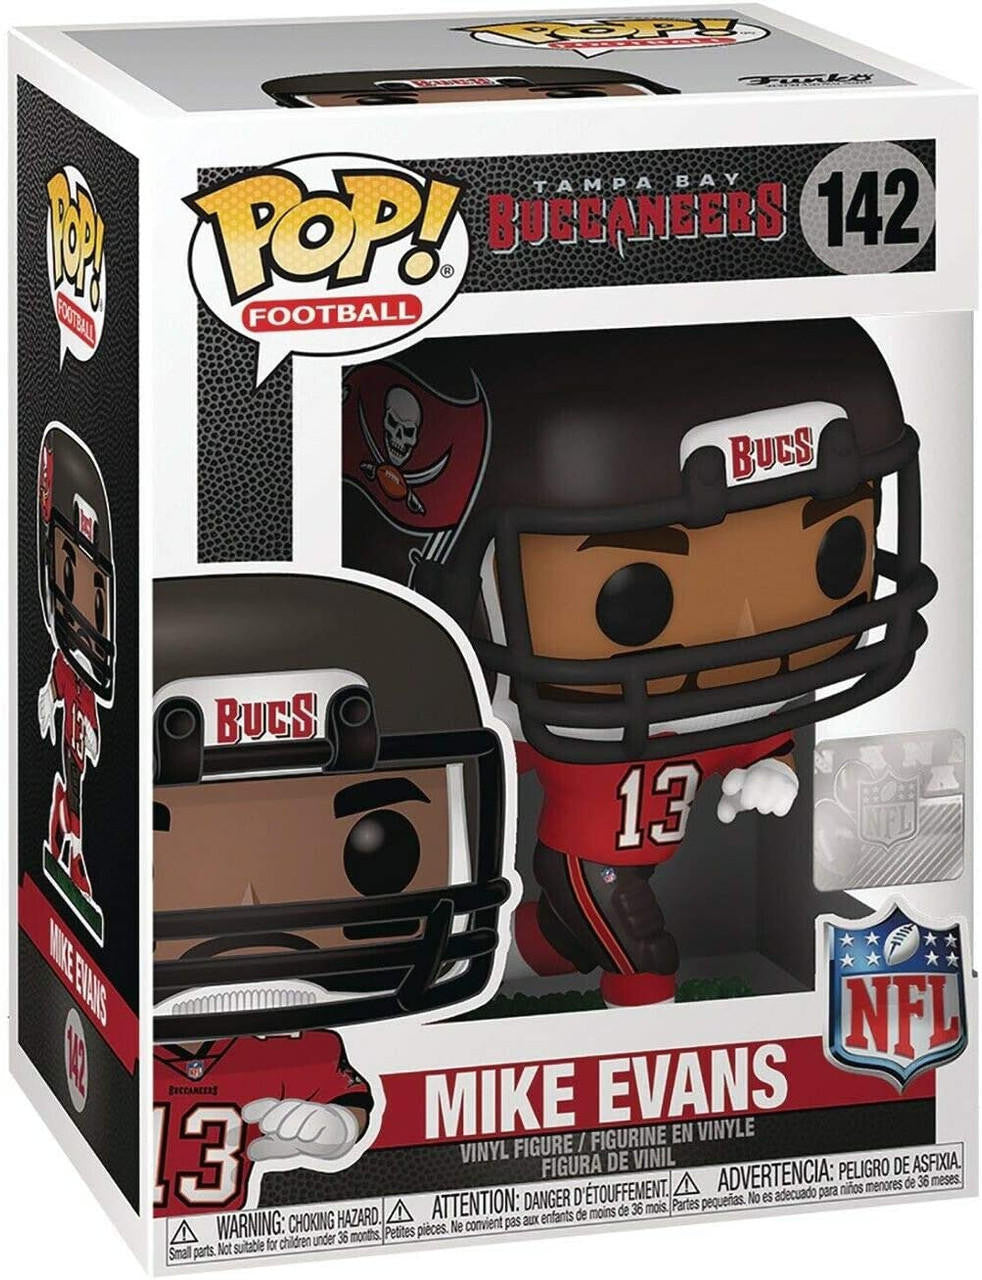 Mike Evans Funko Pop Football 142 W/ Protector